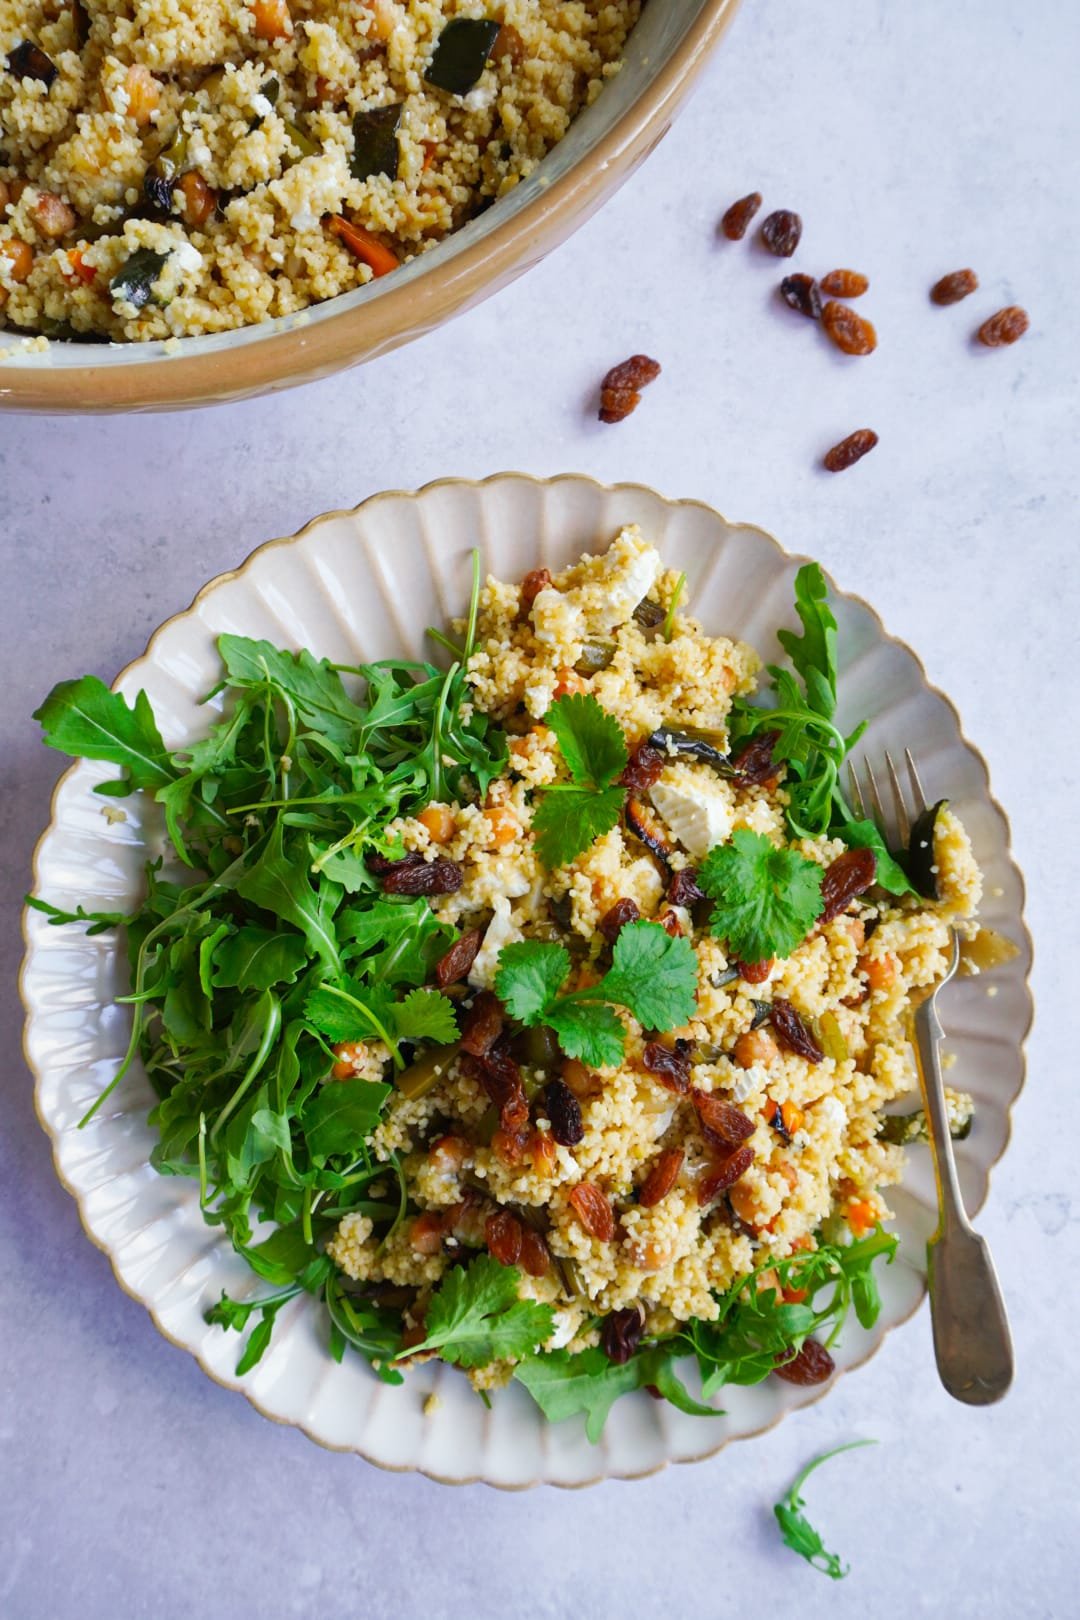 Vibrant green rocket leaves sprinkled on top of the vegetable roasted couscous salad